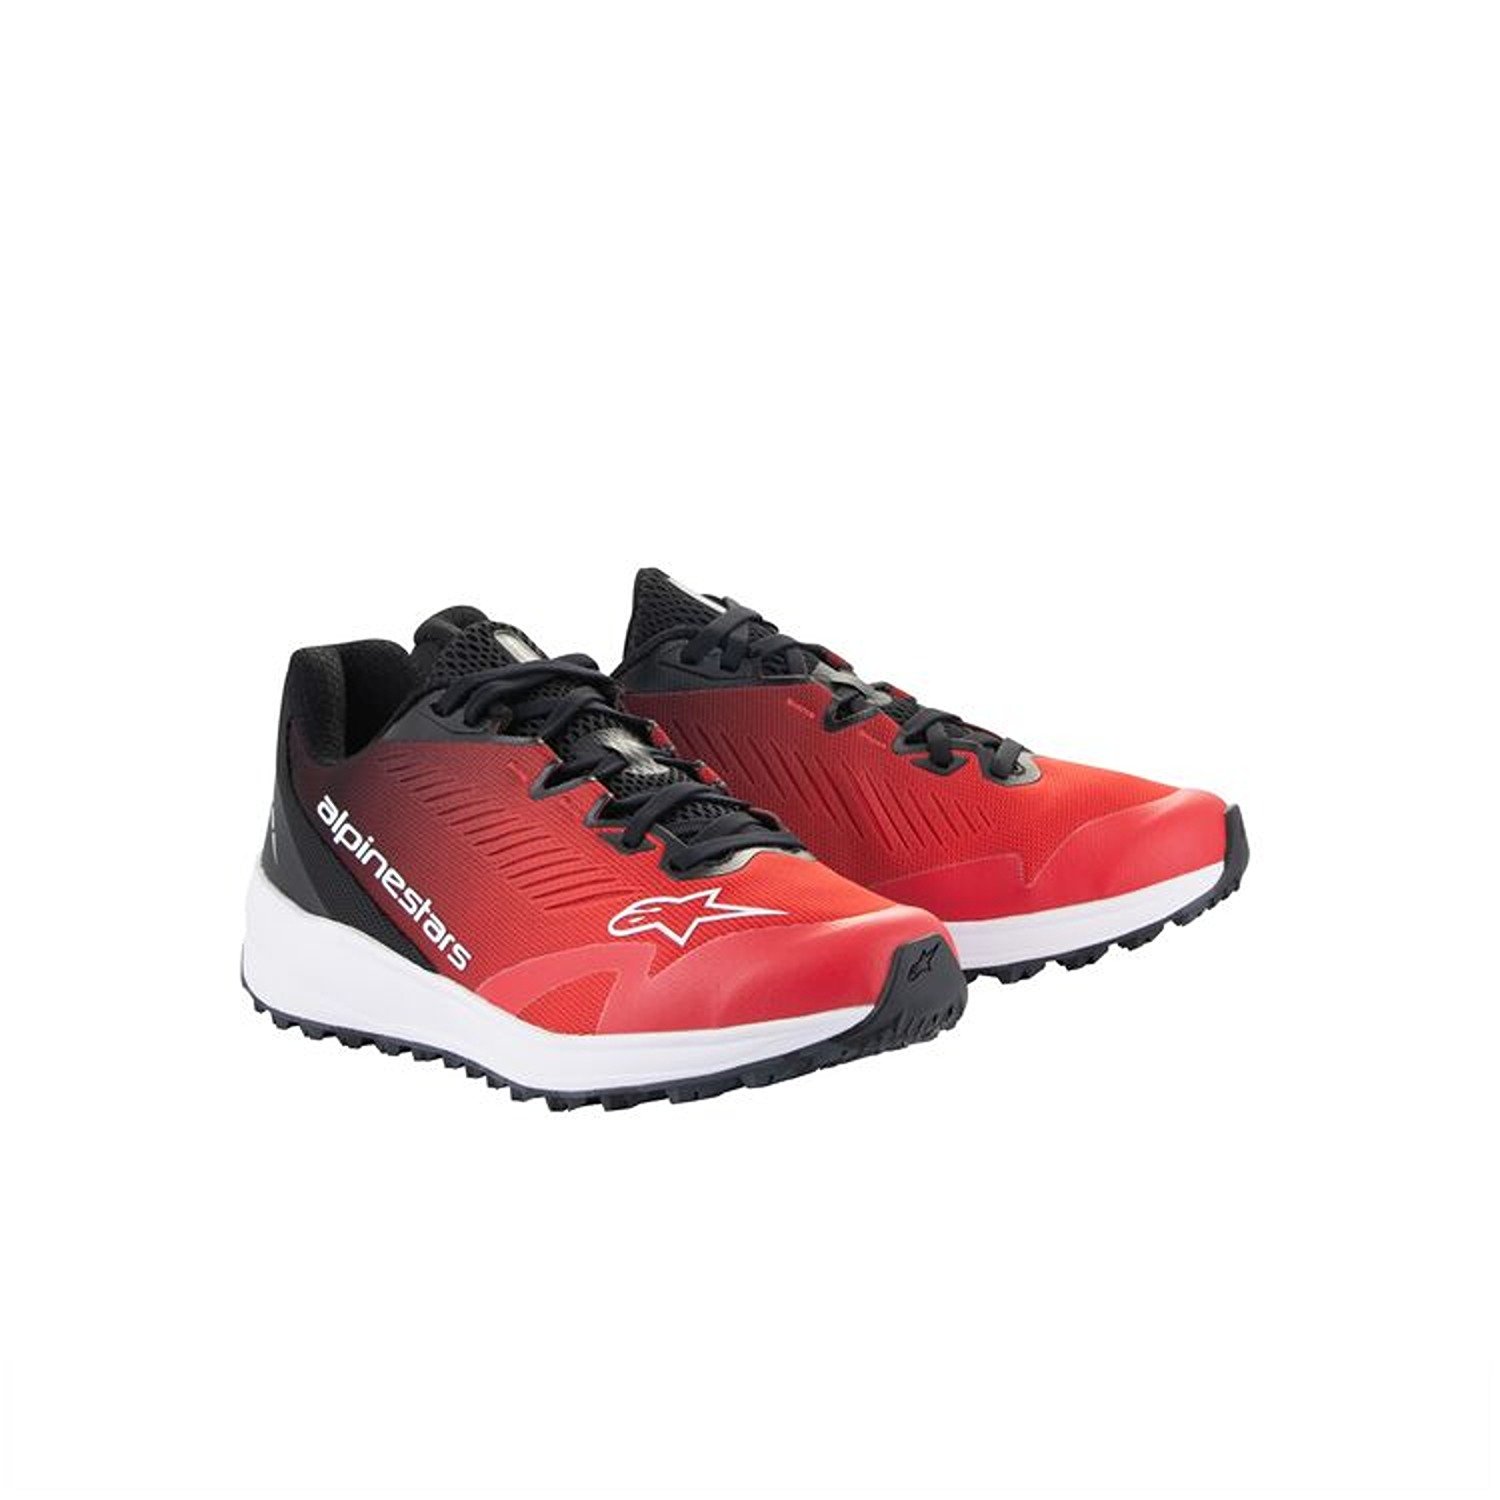 Image of Alpinestars Meta Road V2 Shoes Red Black White Taille US 105